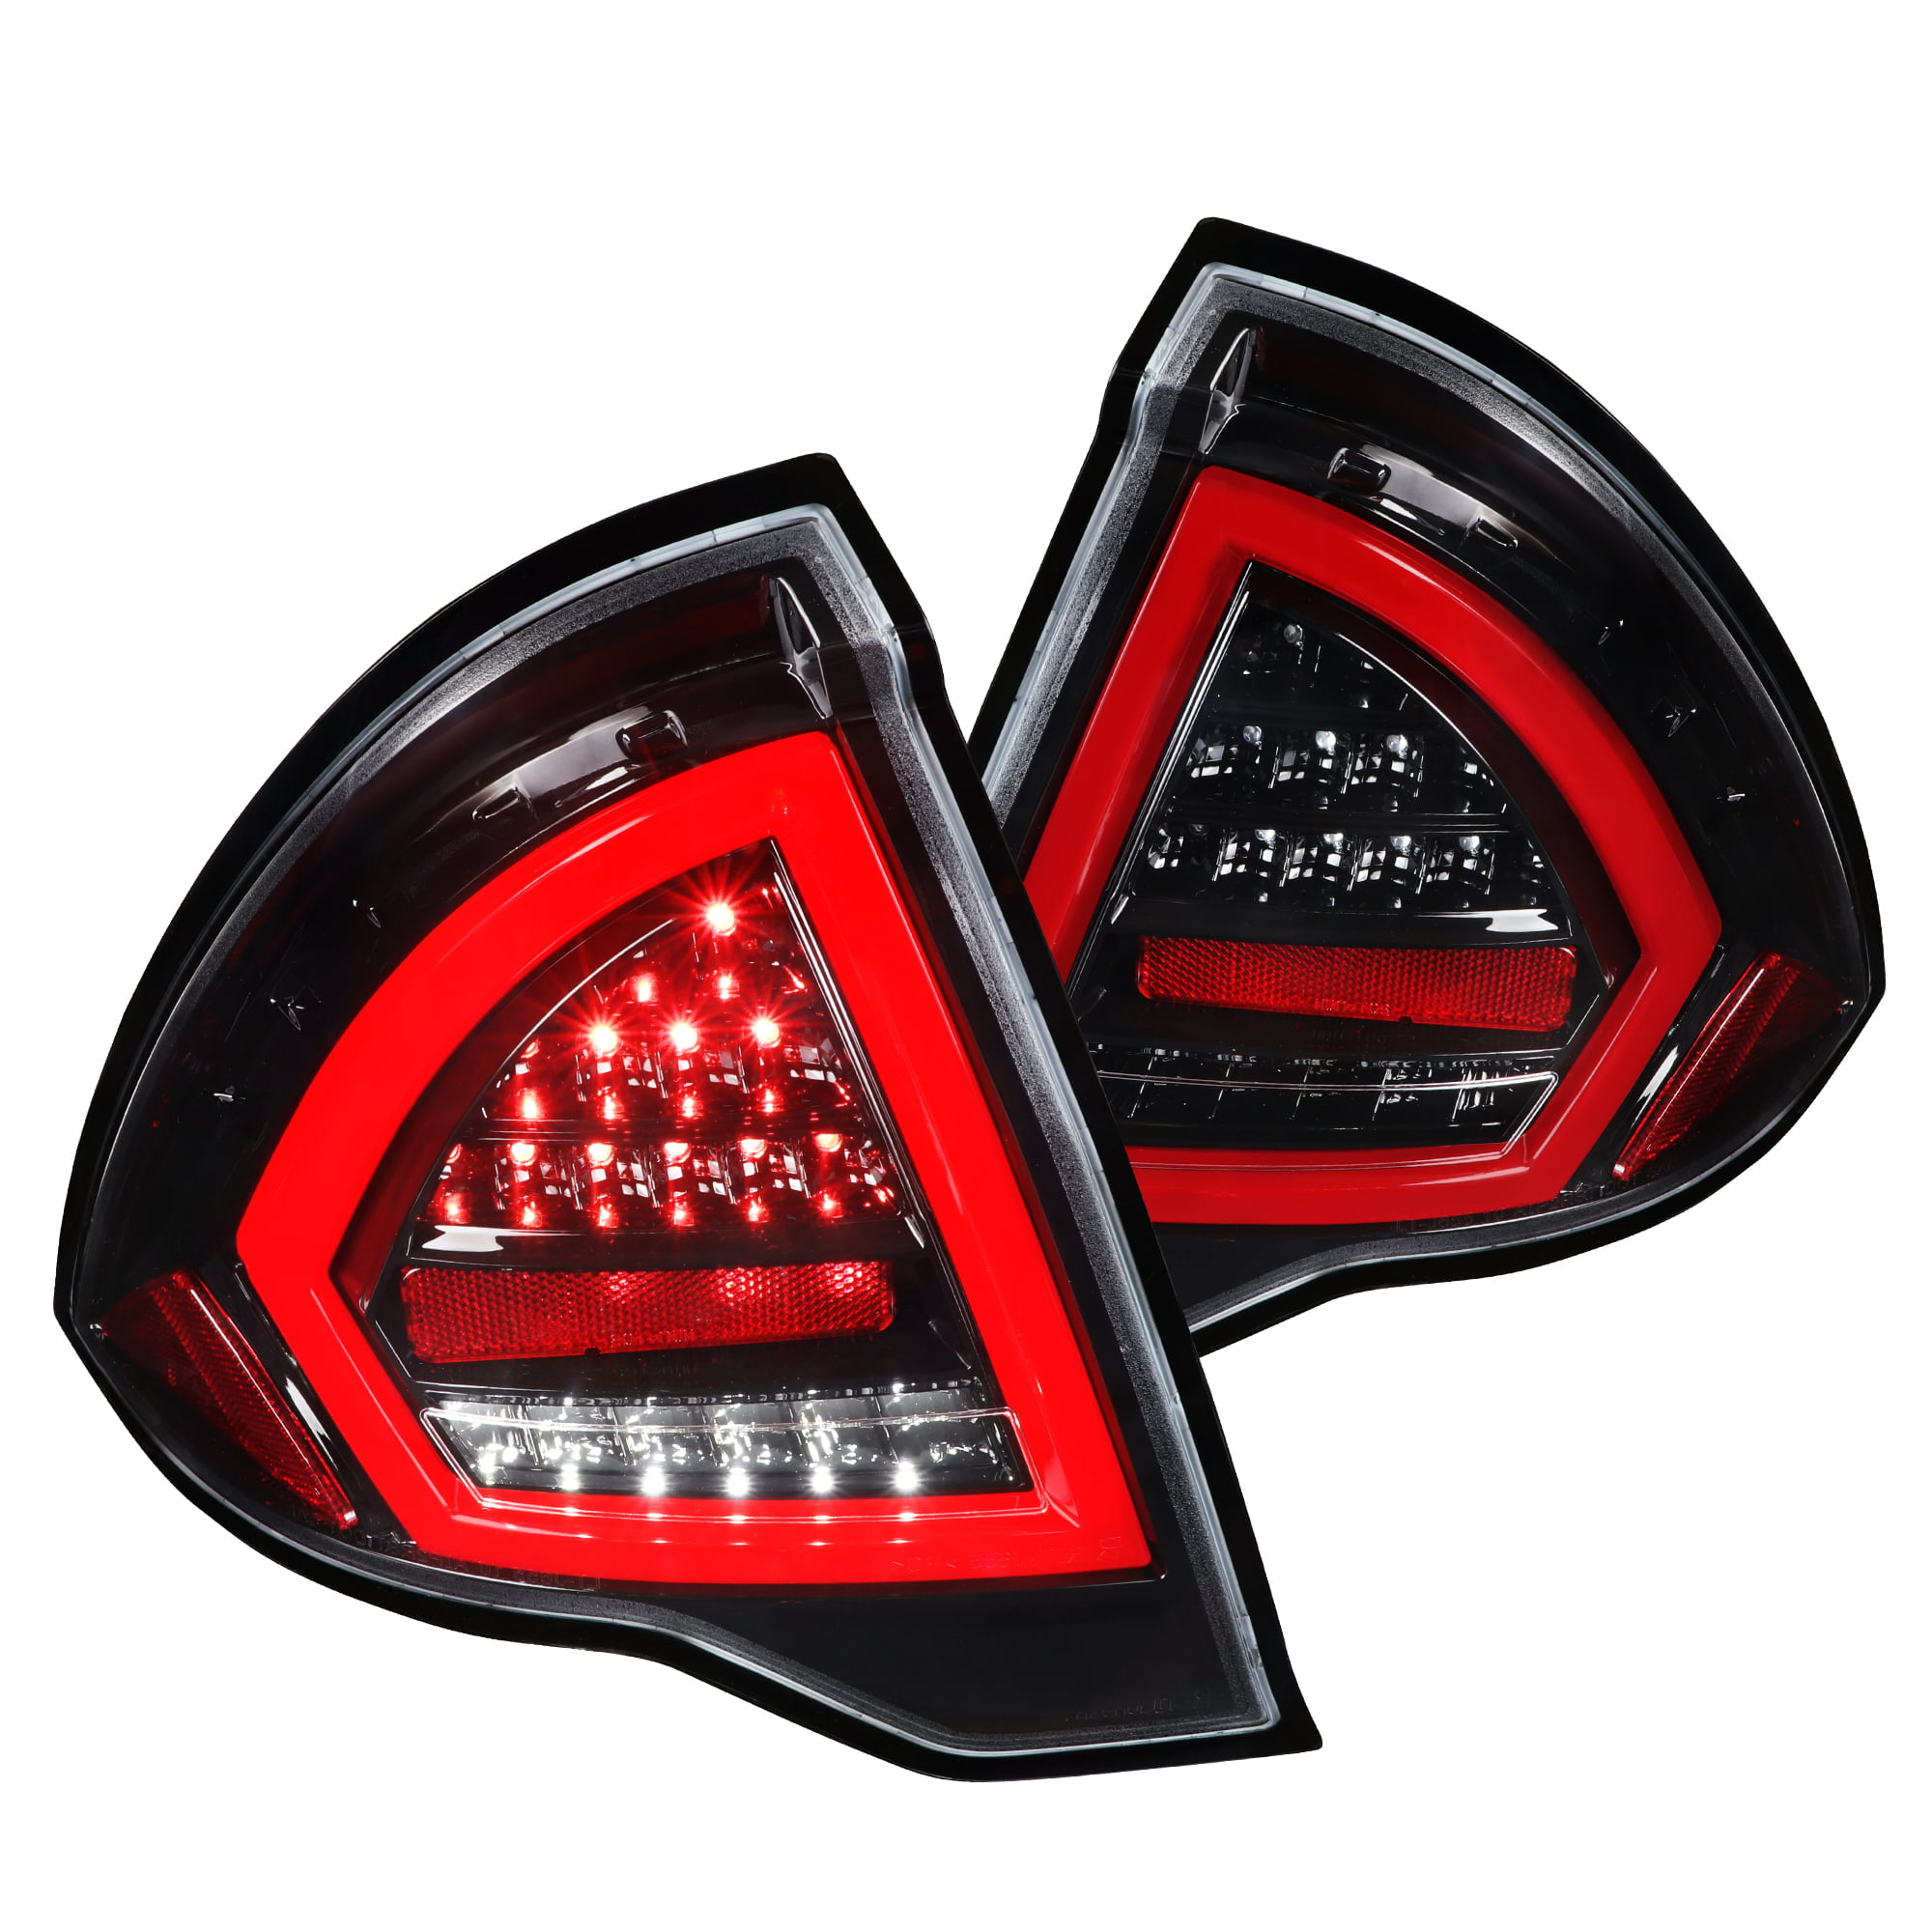 Spec-D Tuning LED Bar Tail Lights for 2010-2012 Ford Fusion Taillights Assembly Left + Right 2010 Ford Fusion Rear Tail Light Assembly